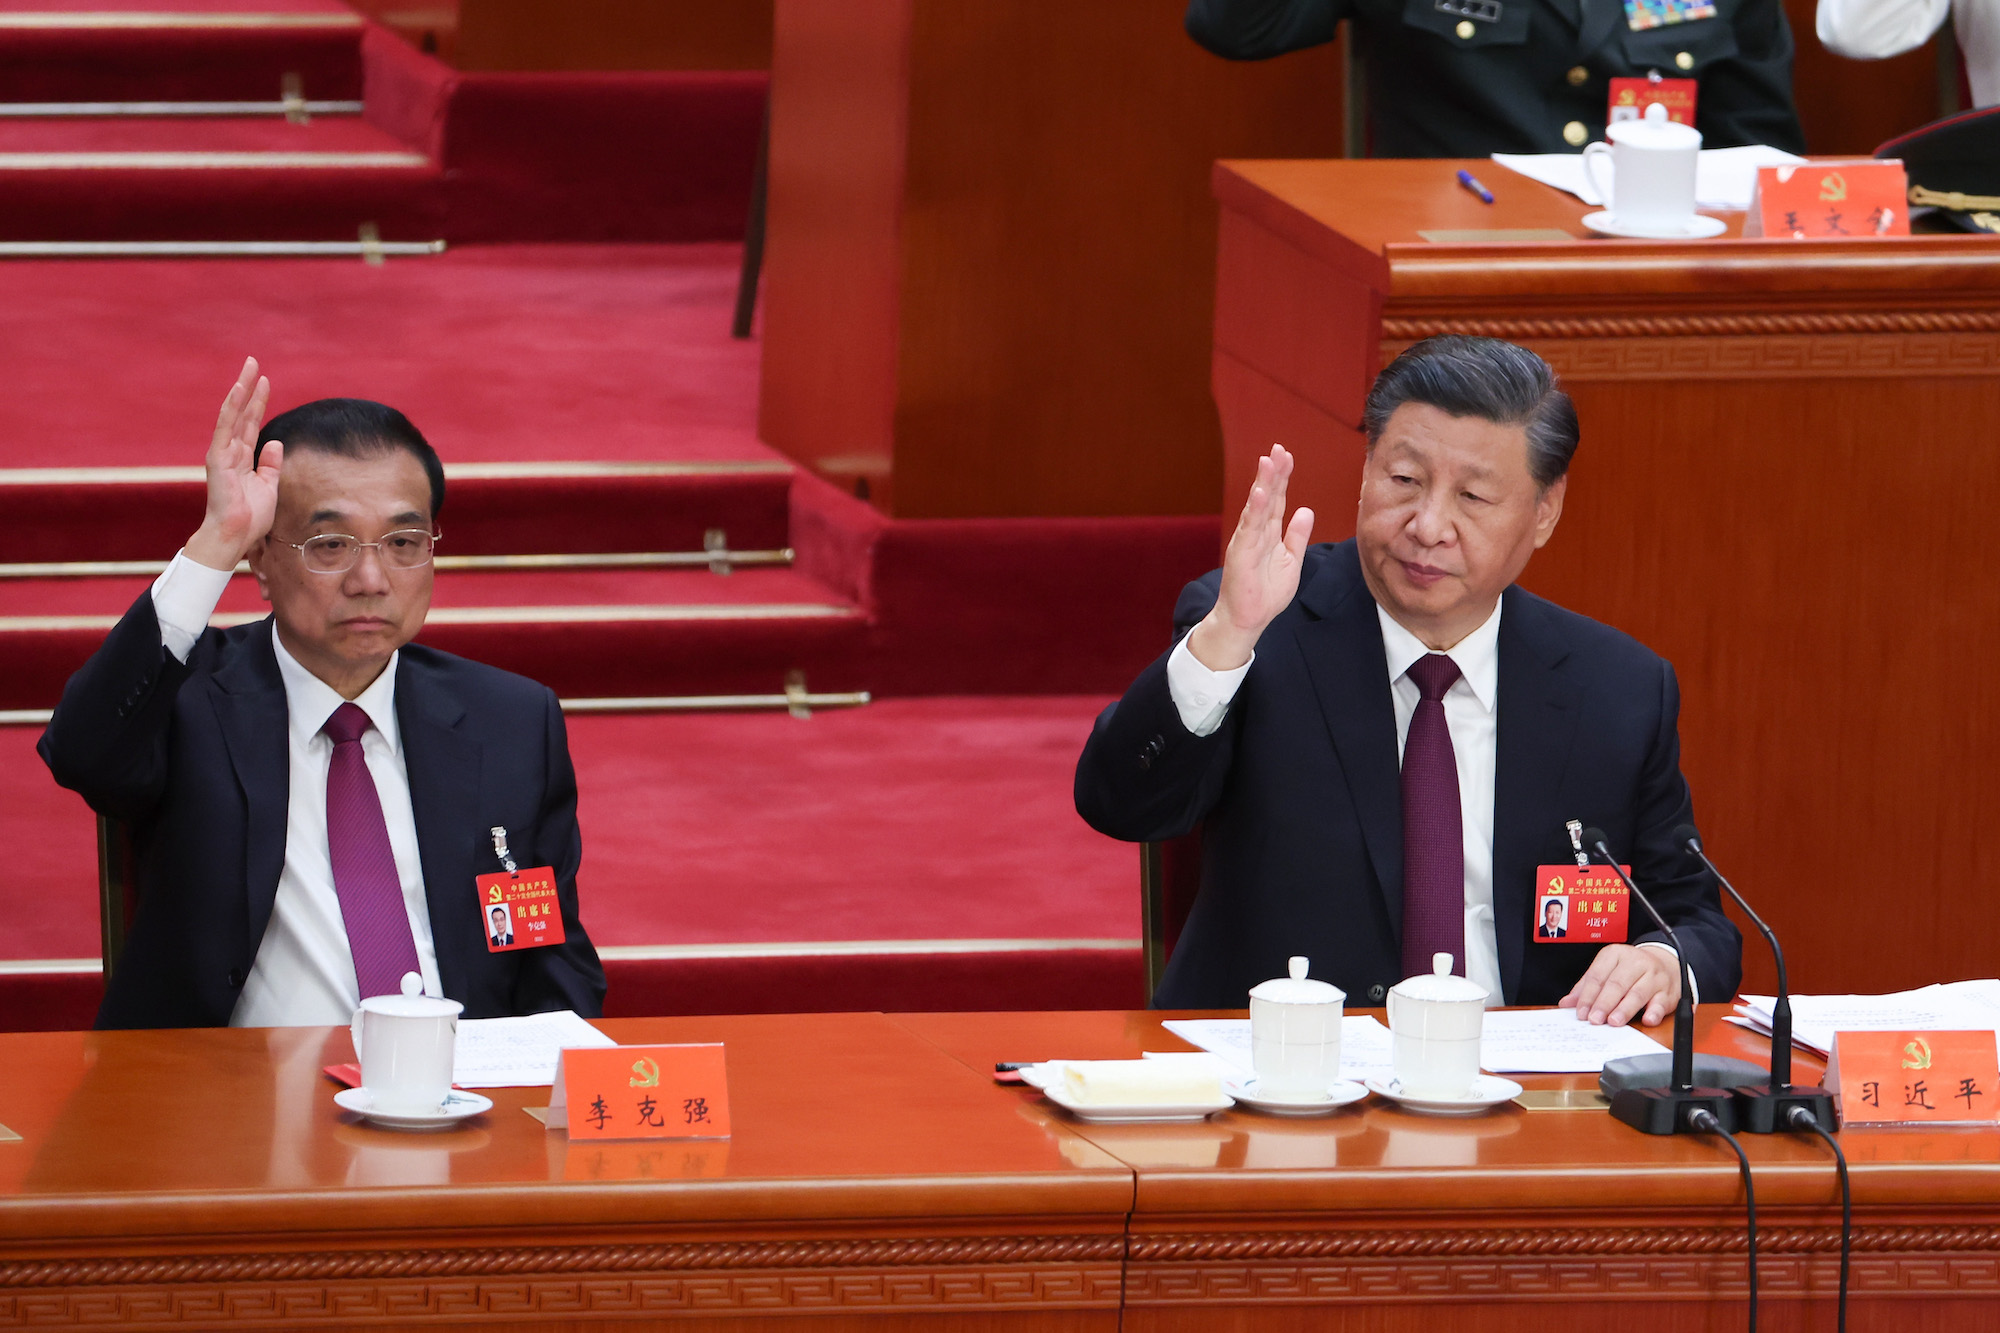 Chinese Premier Li Keqiang, left, and Xi Jinping, right, vote at the closing ceremony at the Great Hall of the People on October 22.